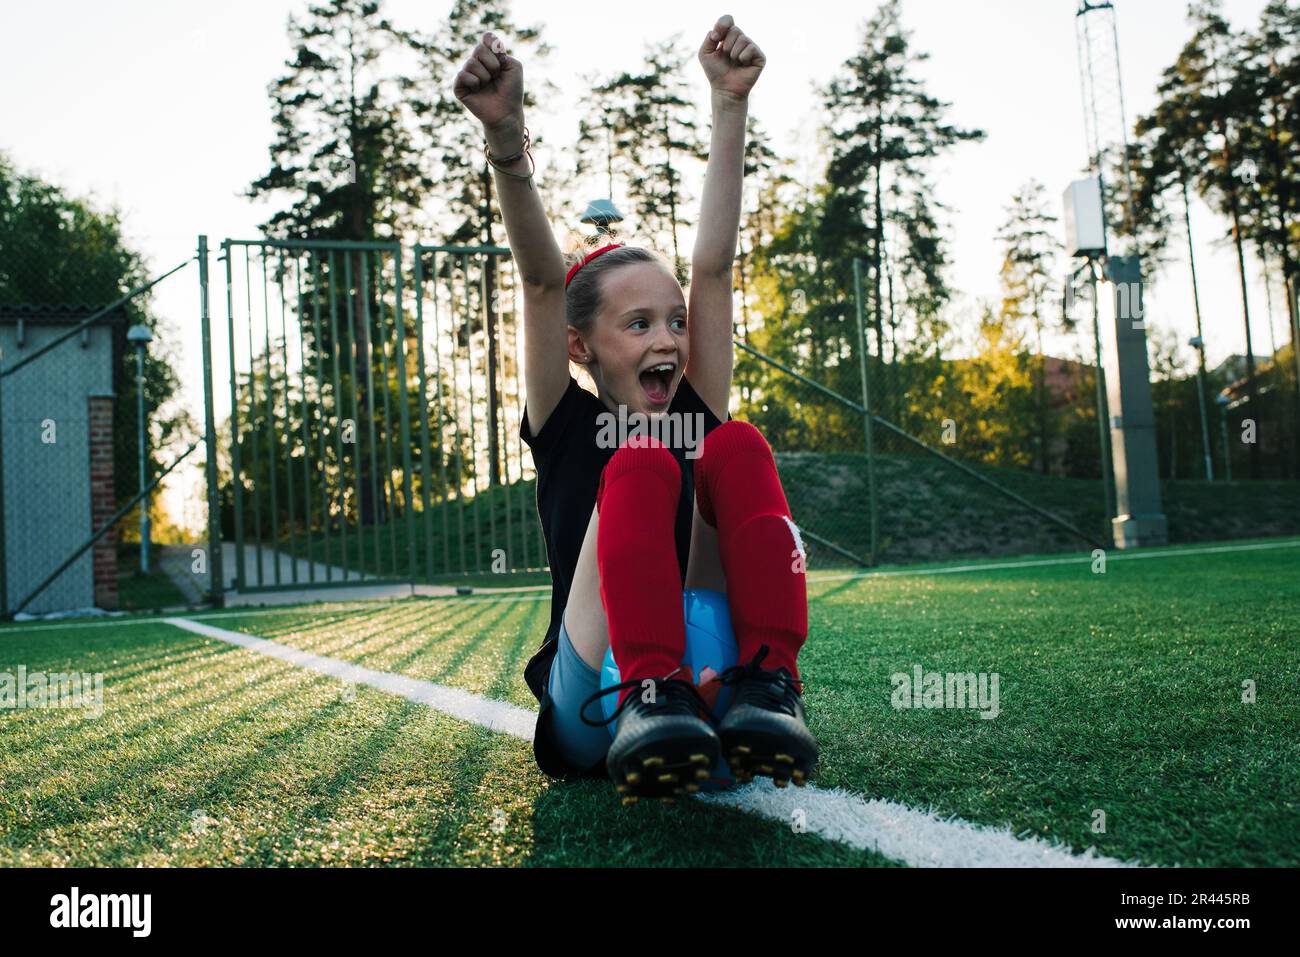 girl cheering for her team mates whilst playing football Stock Photo